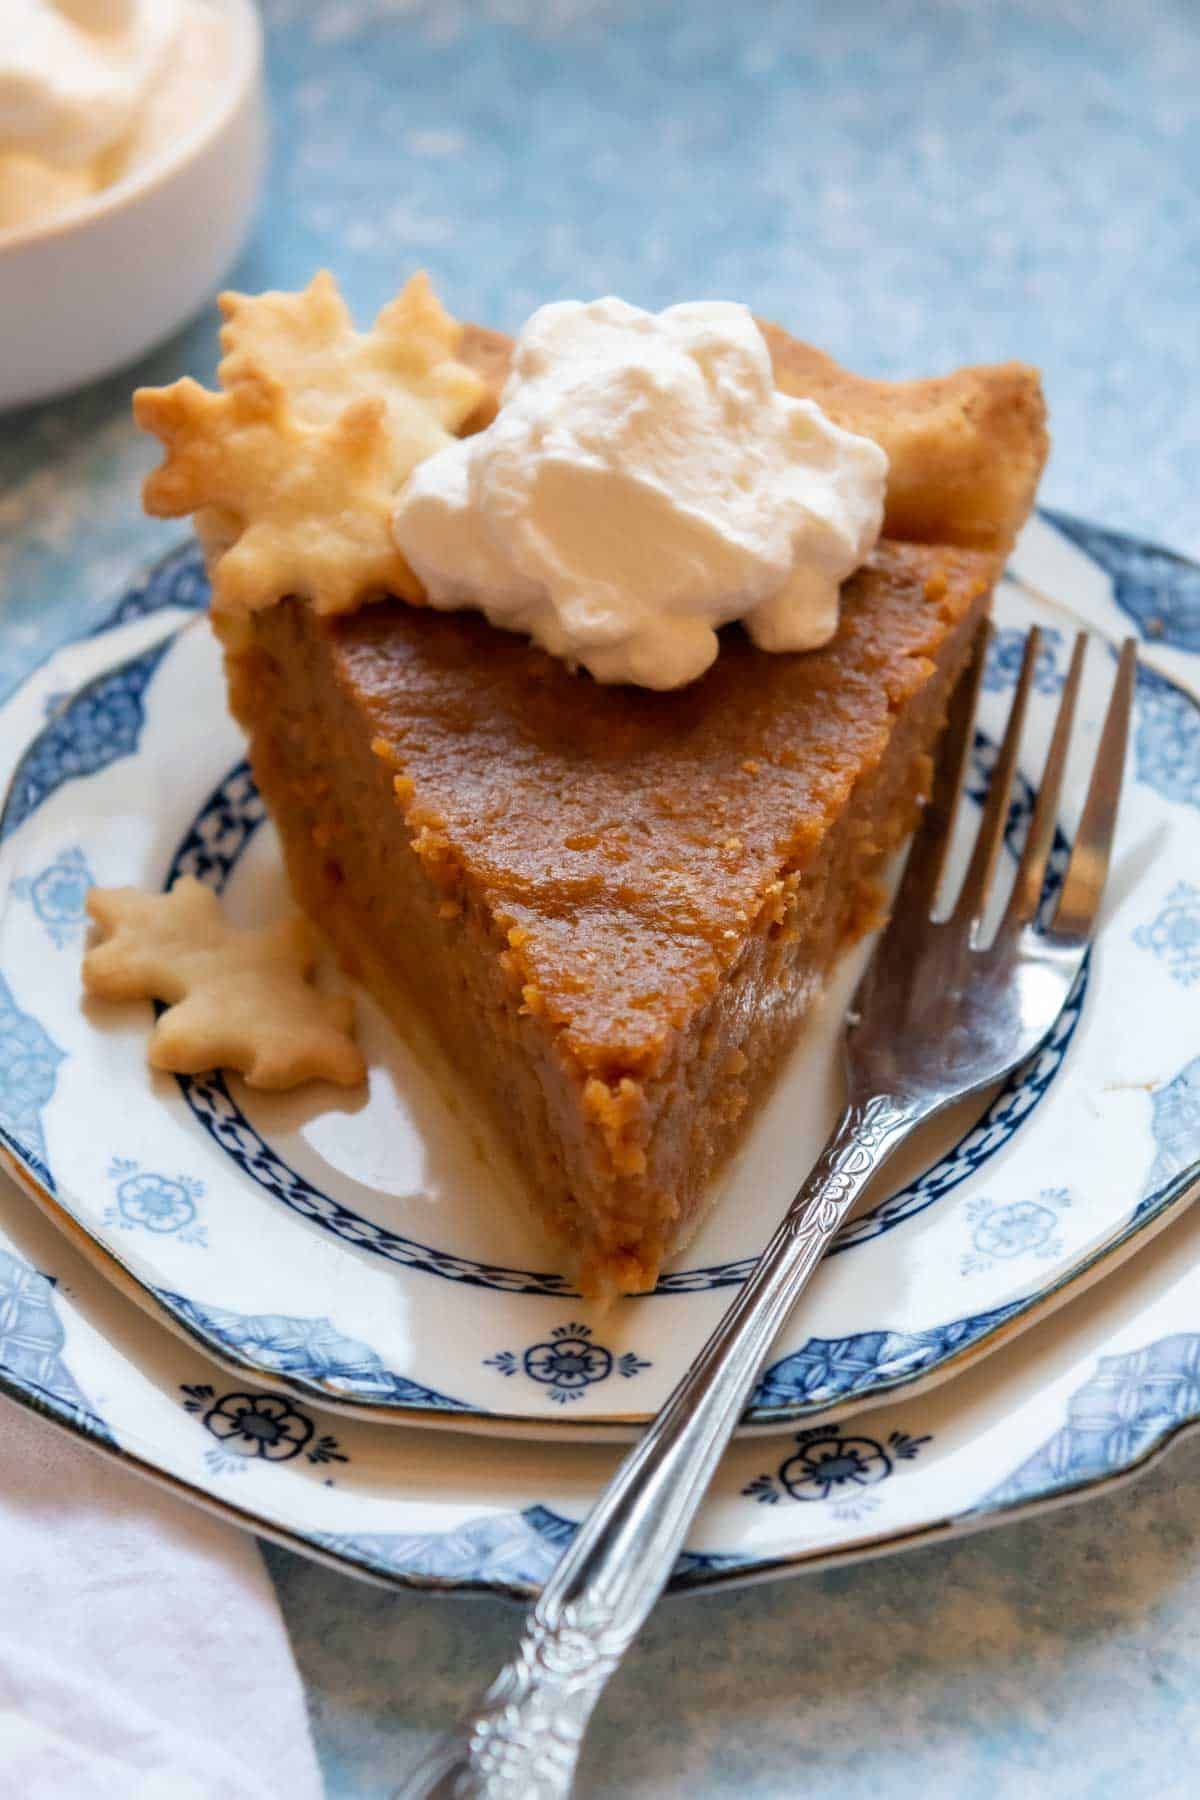 A piece of Gluten-Free Sweet Potato Pie with Flaky Crust on a blue plate with a fork.